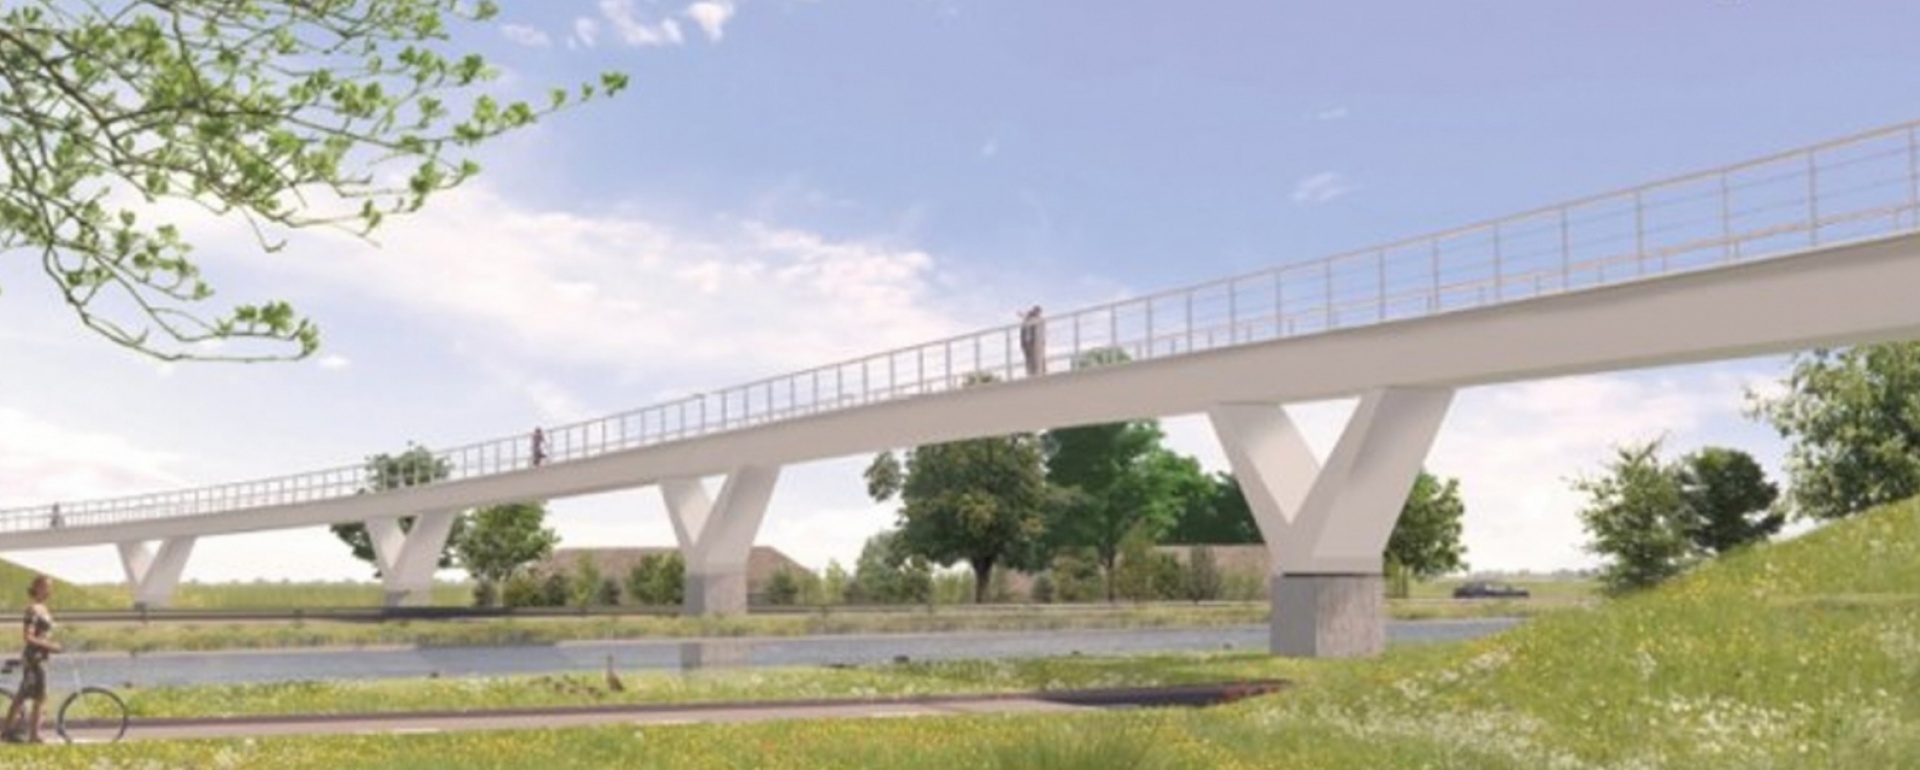 Solico’s most recent project, an impressive bicycle bridge over the N207 and the Aarkanaal is currently being built